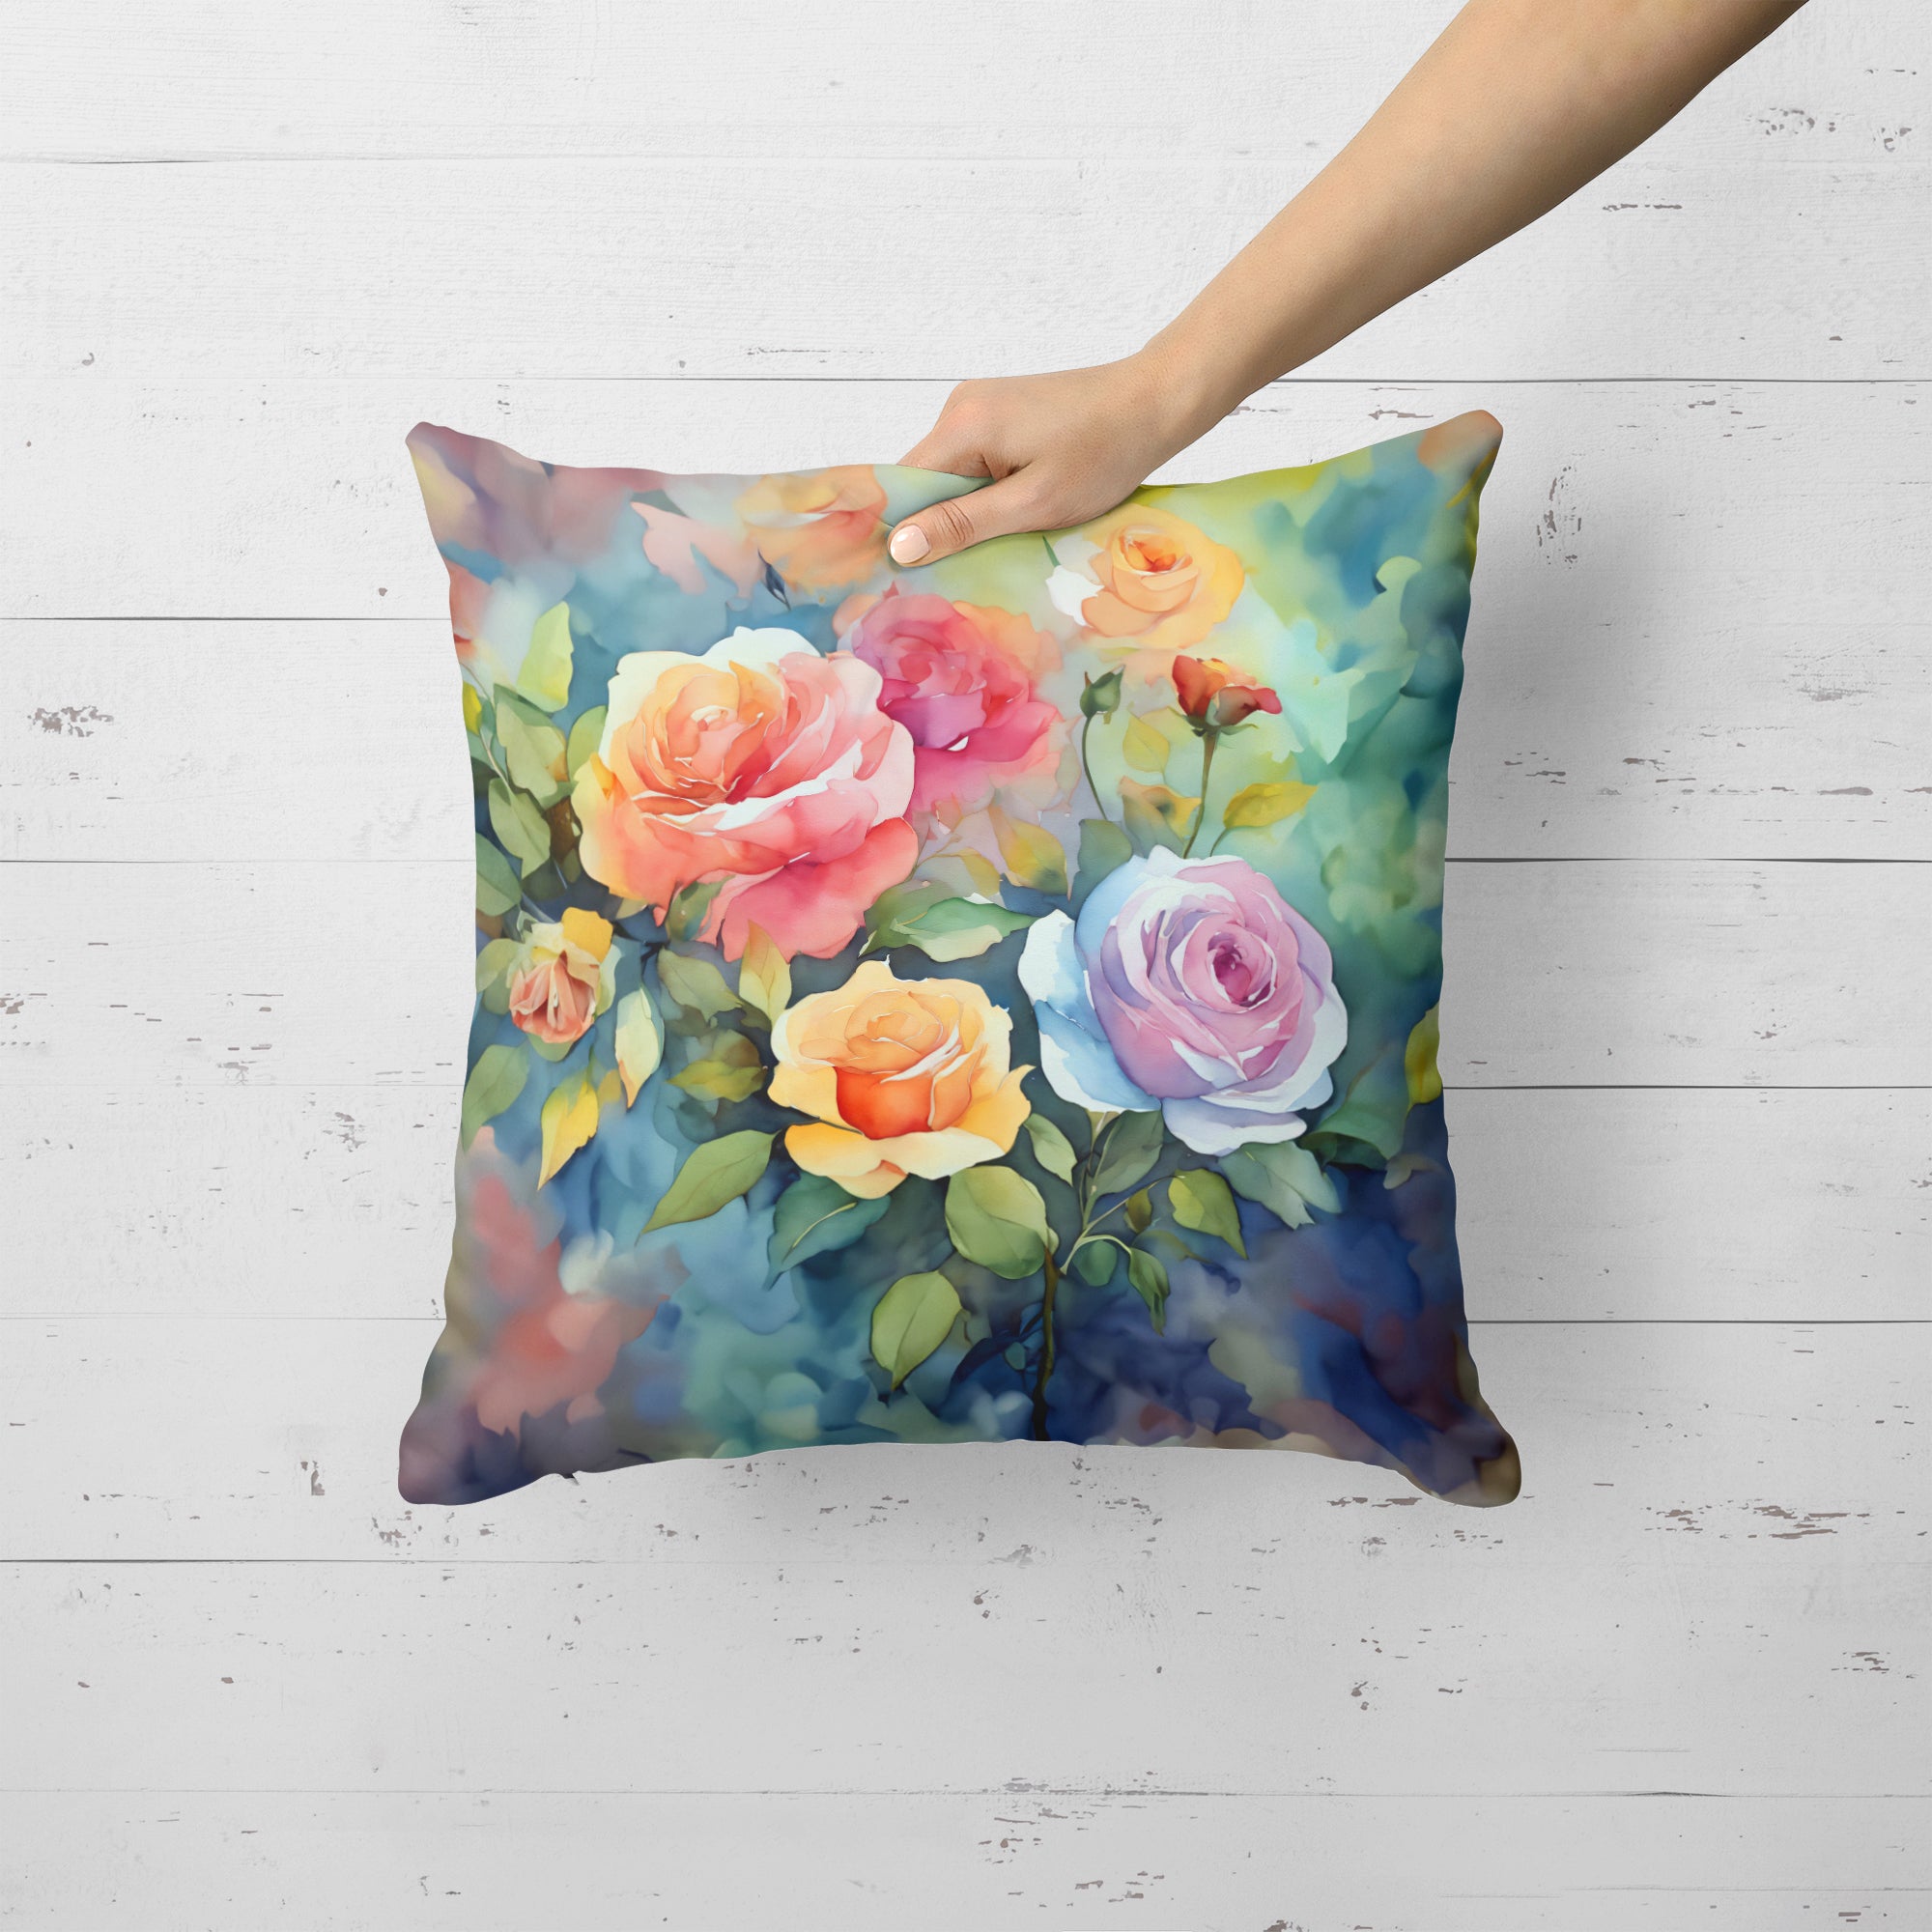 Buy this Roses in Watercolor Throw Pillow